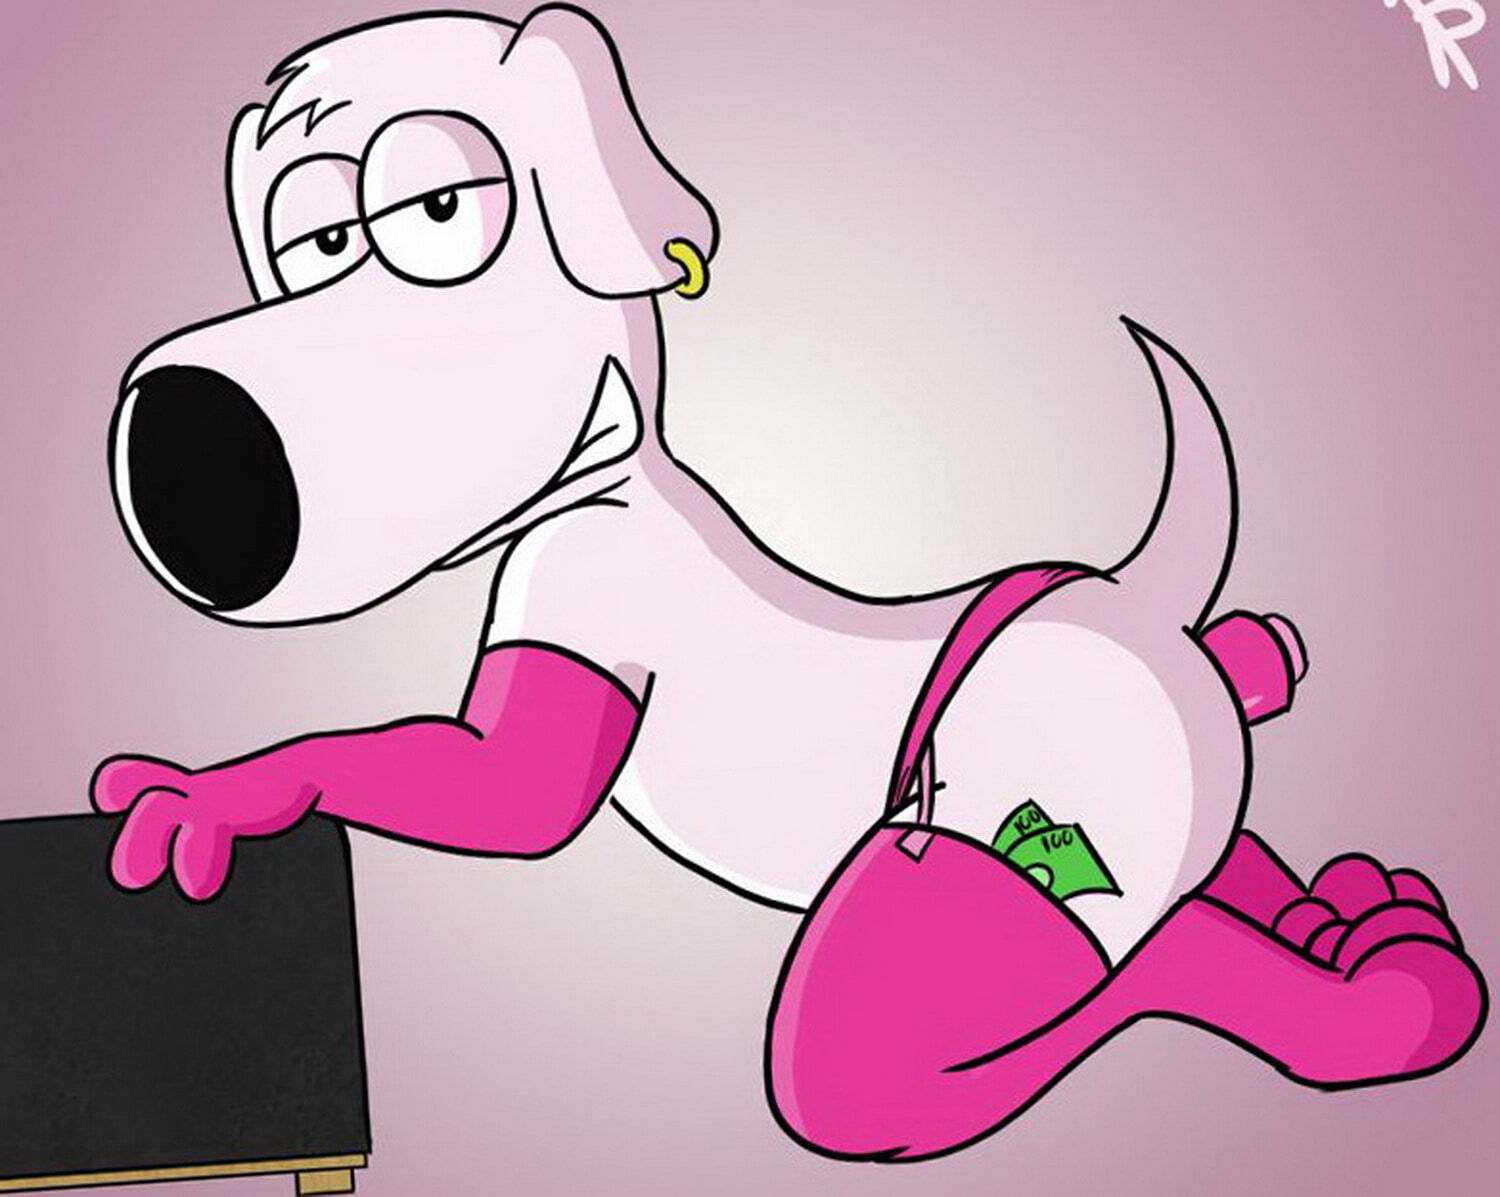 Family Guy pics tagged as rule 34, hentai. 